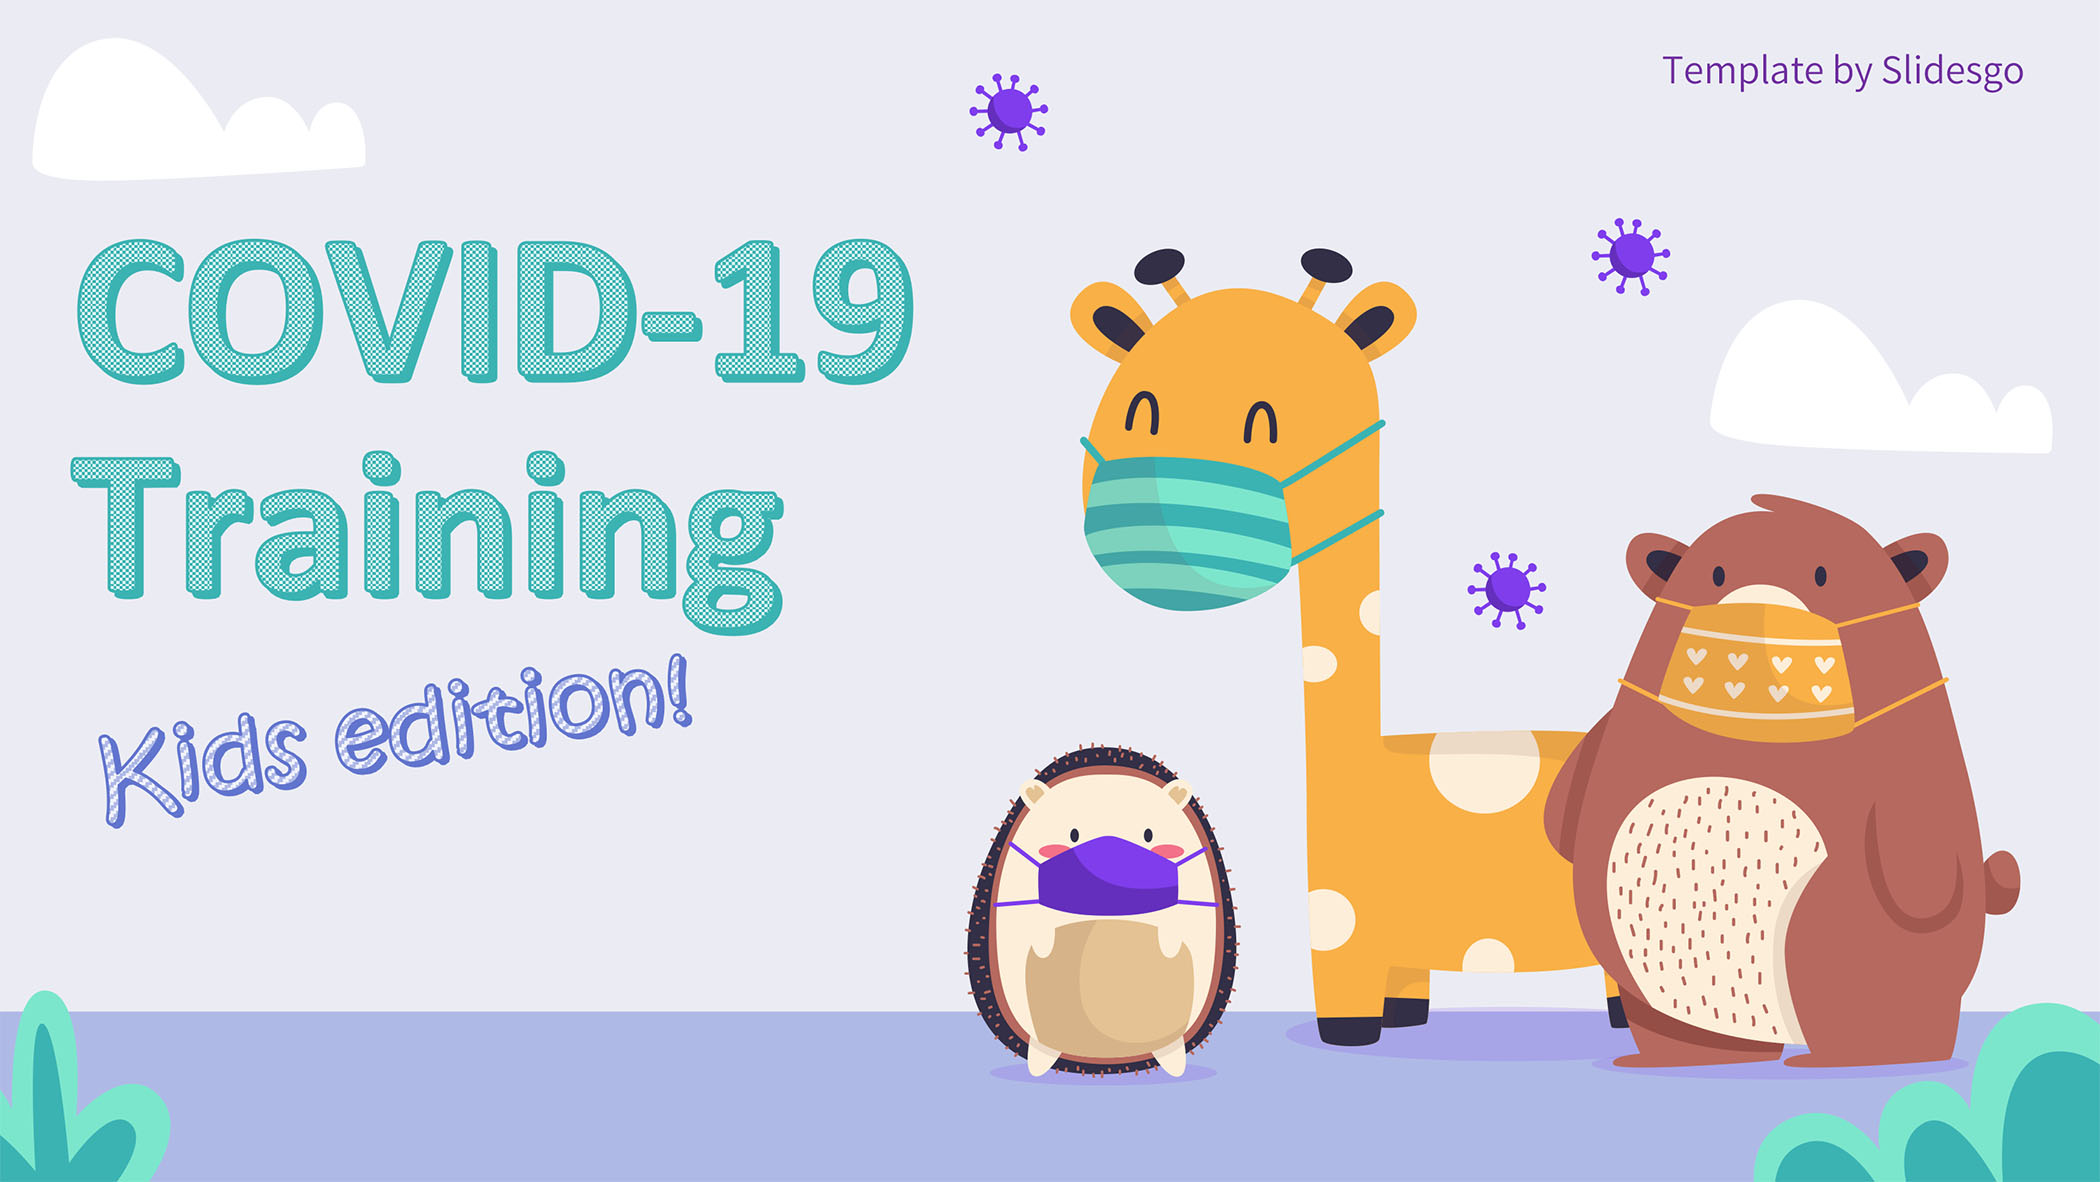 A graphic that says "COVID-19 Training Kids Edition" with a cartoon giraffe, hedgehog and bear wearing masks.